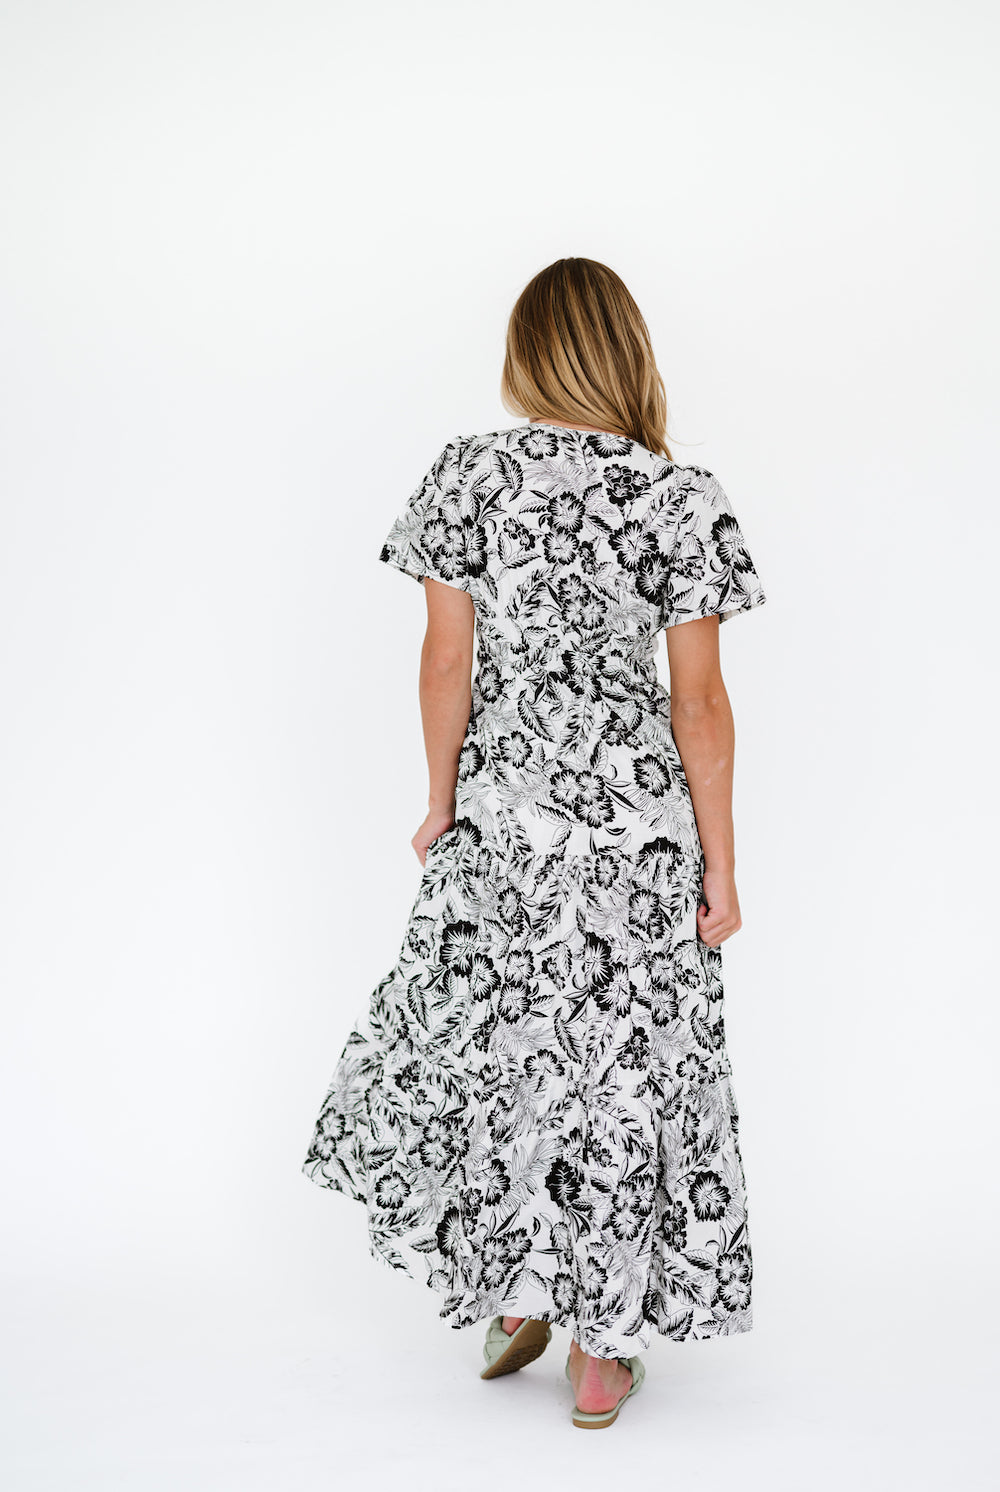 Black and white floral printed dress